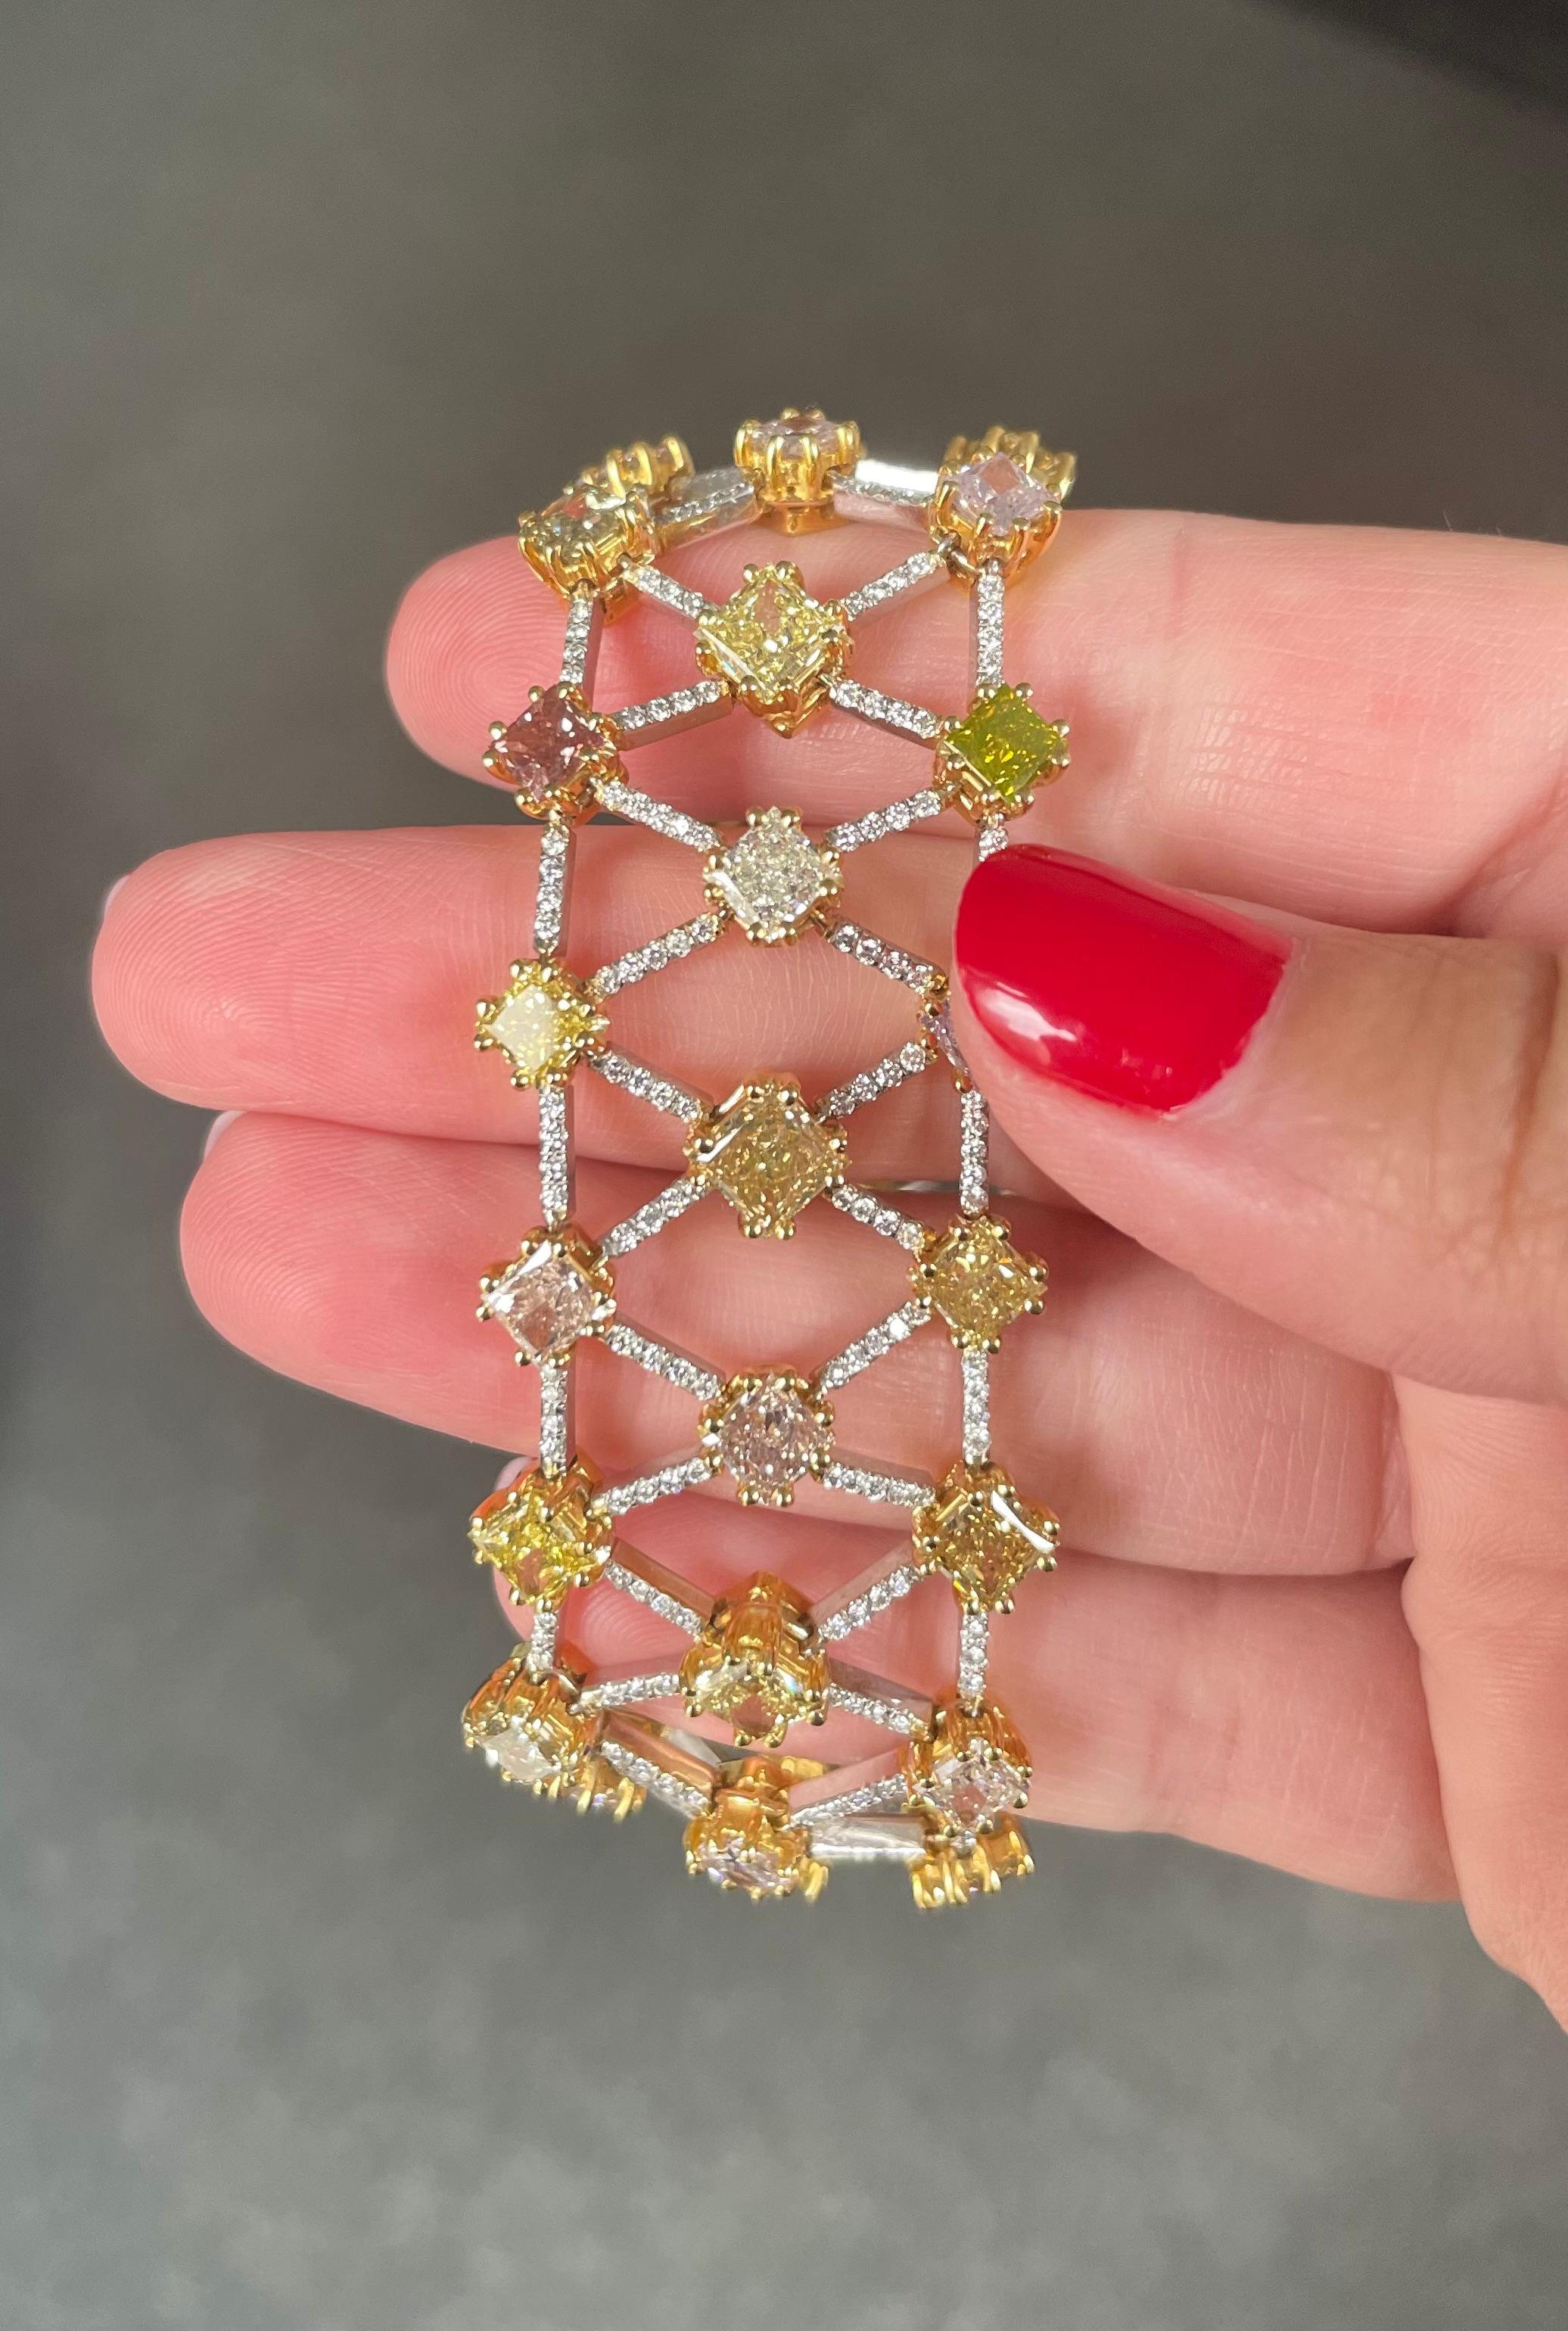 This exceptional celebration of color is truly a one of a kind piece! This gorgeous bracelet is a rainbow of yellow, green, pink, and orange fancy colored diamonds. The diamonds are set in 18K yellow gold, which is a beautiful complement to the